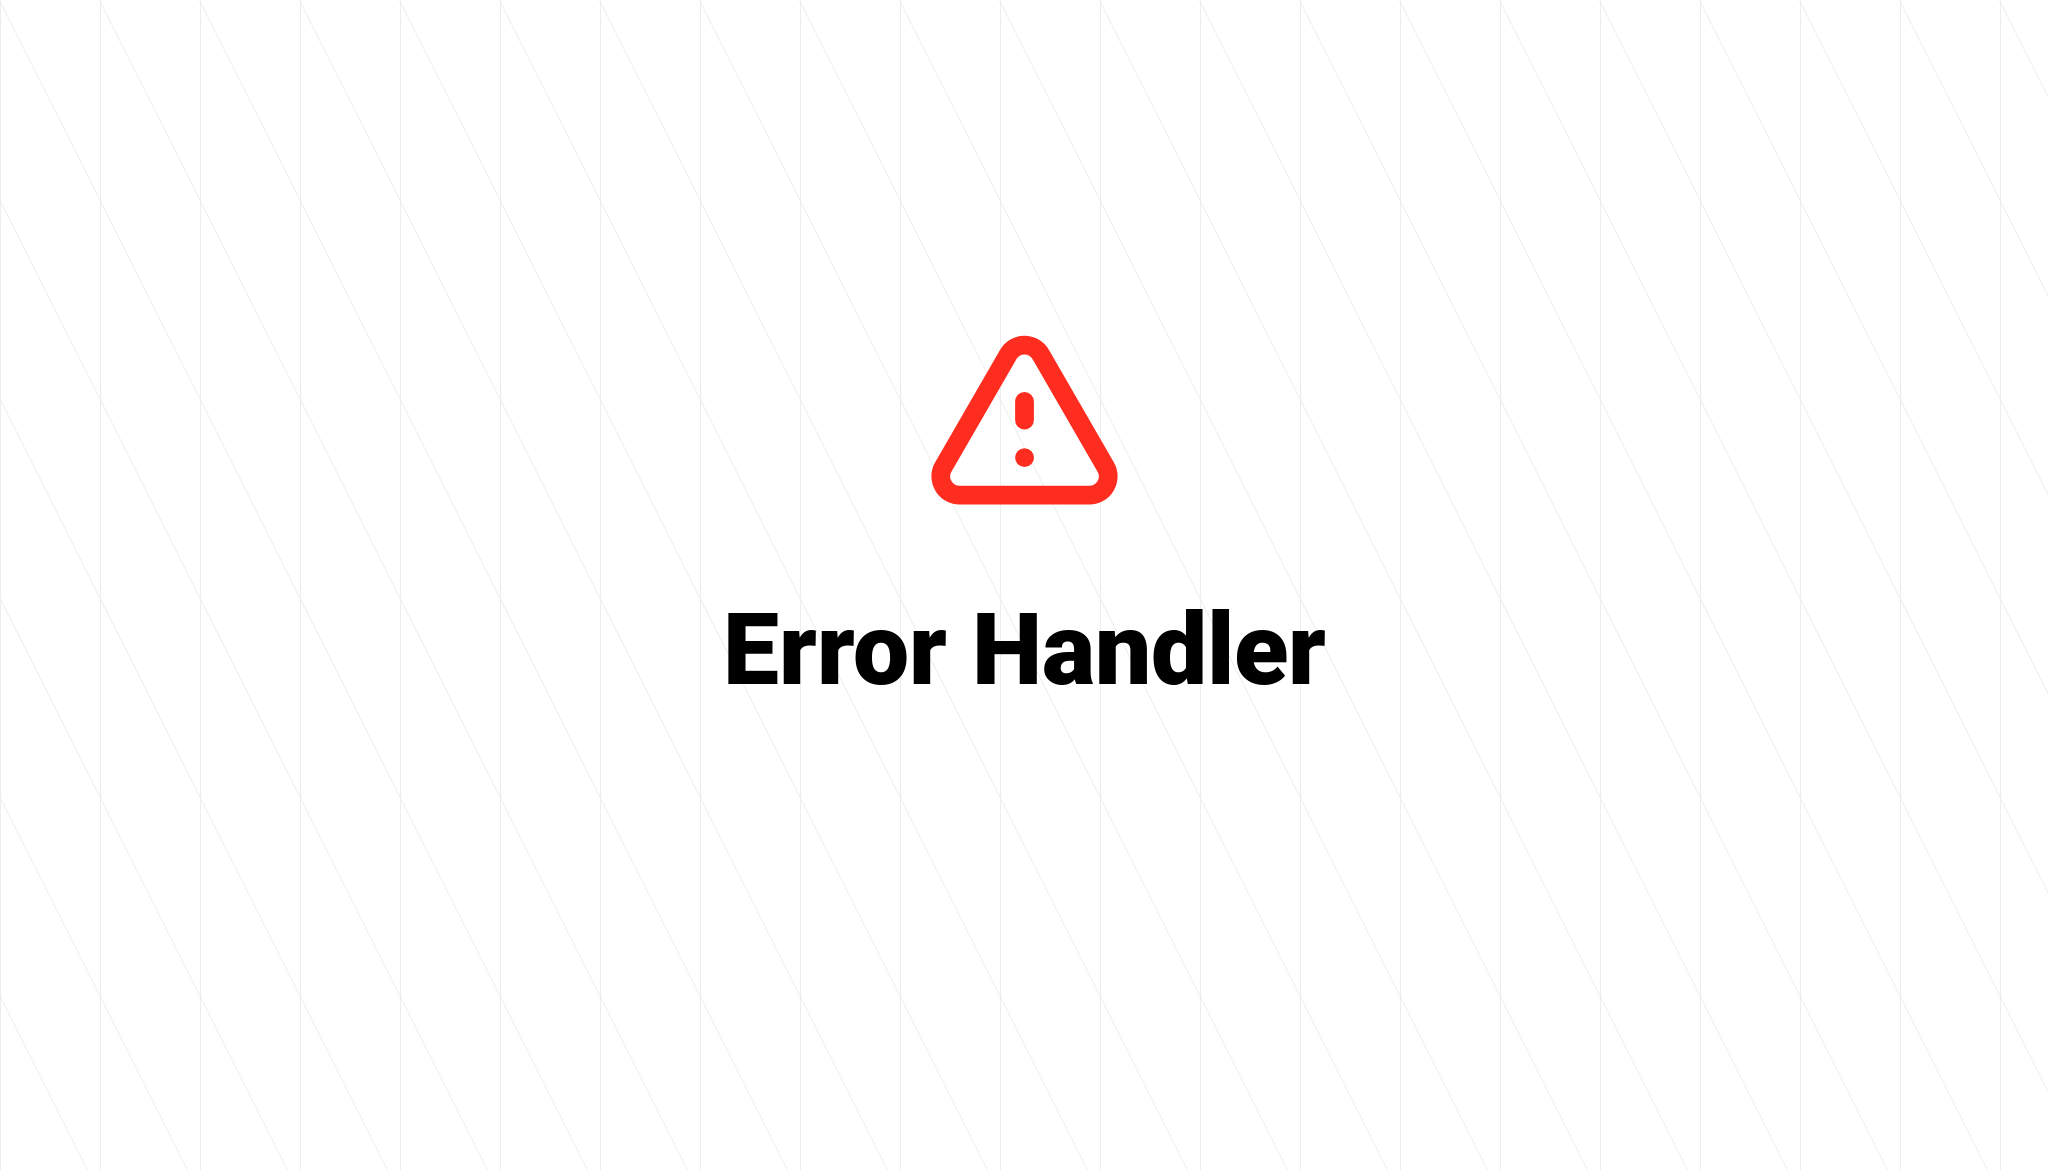 Error%20Handler.png?theme=light&pattern=architect&style=style_1&md=1&showWatermark=0&fontSize=100px&images=exclamation&widths=auto